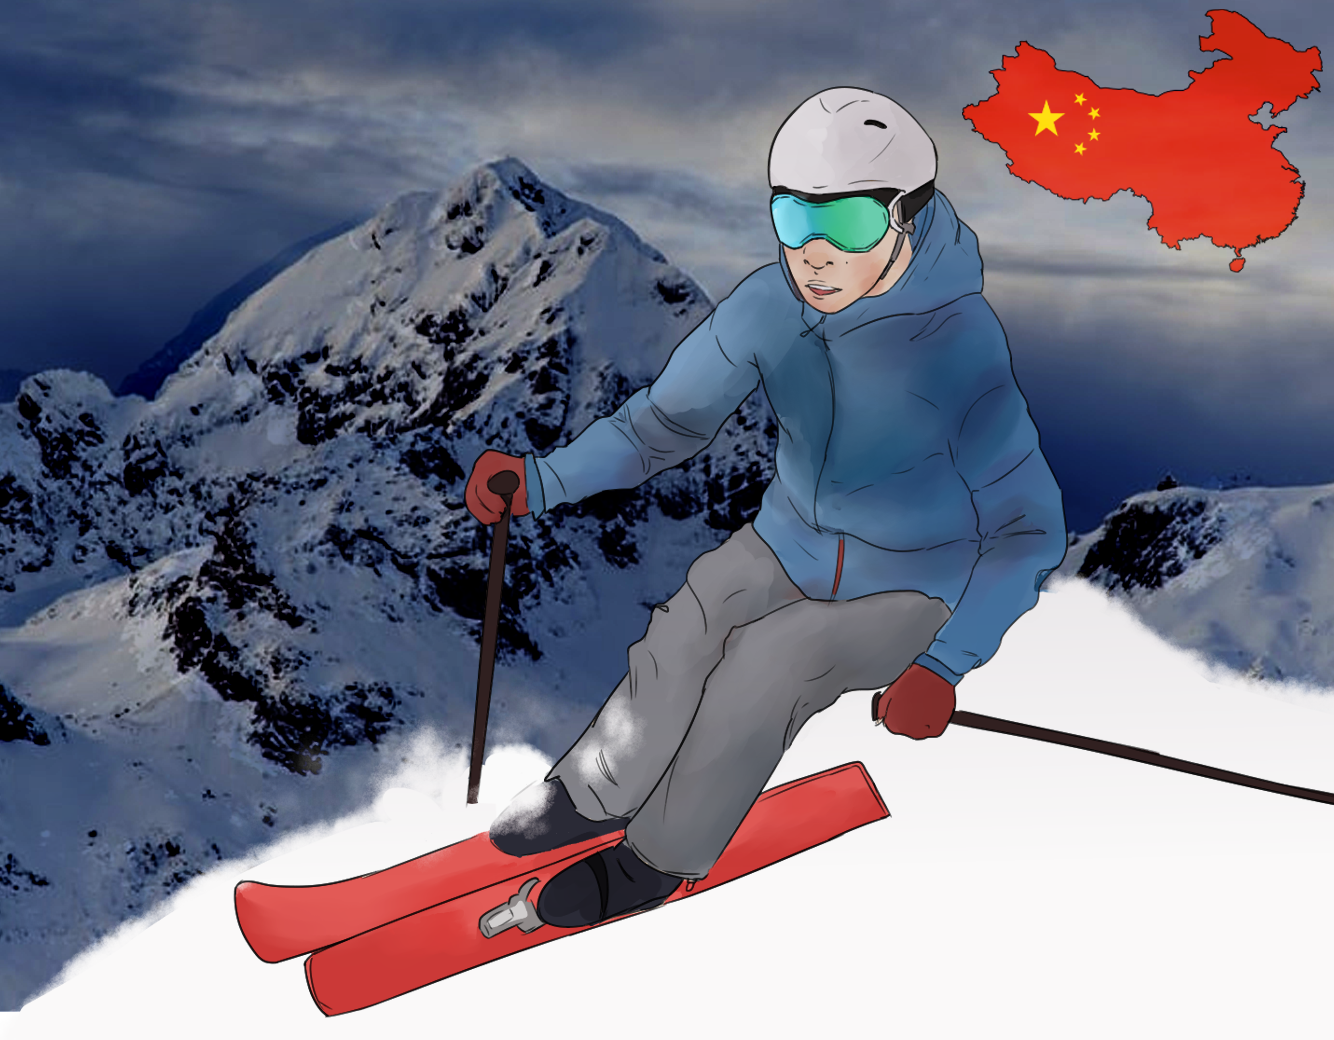 Animated Olympic skier on snow in backdrop of snowy mountains and a red map of China in the upper right corner.